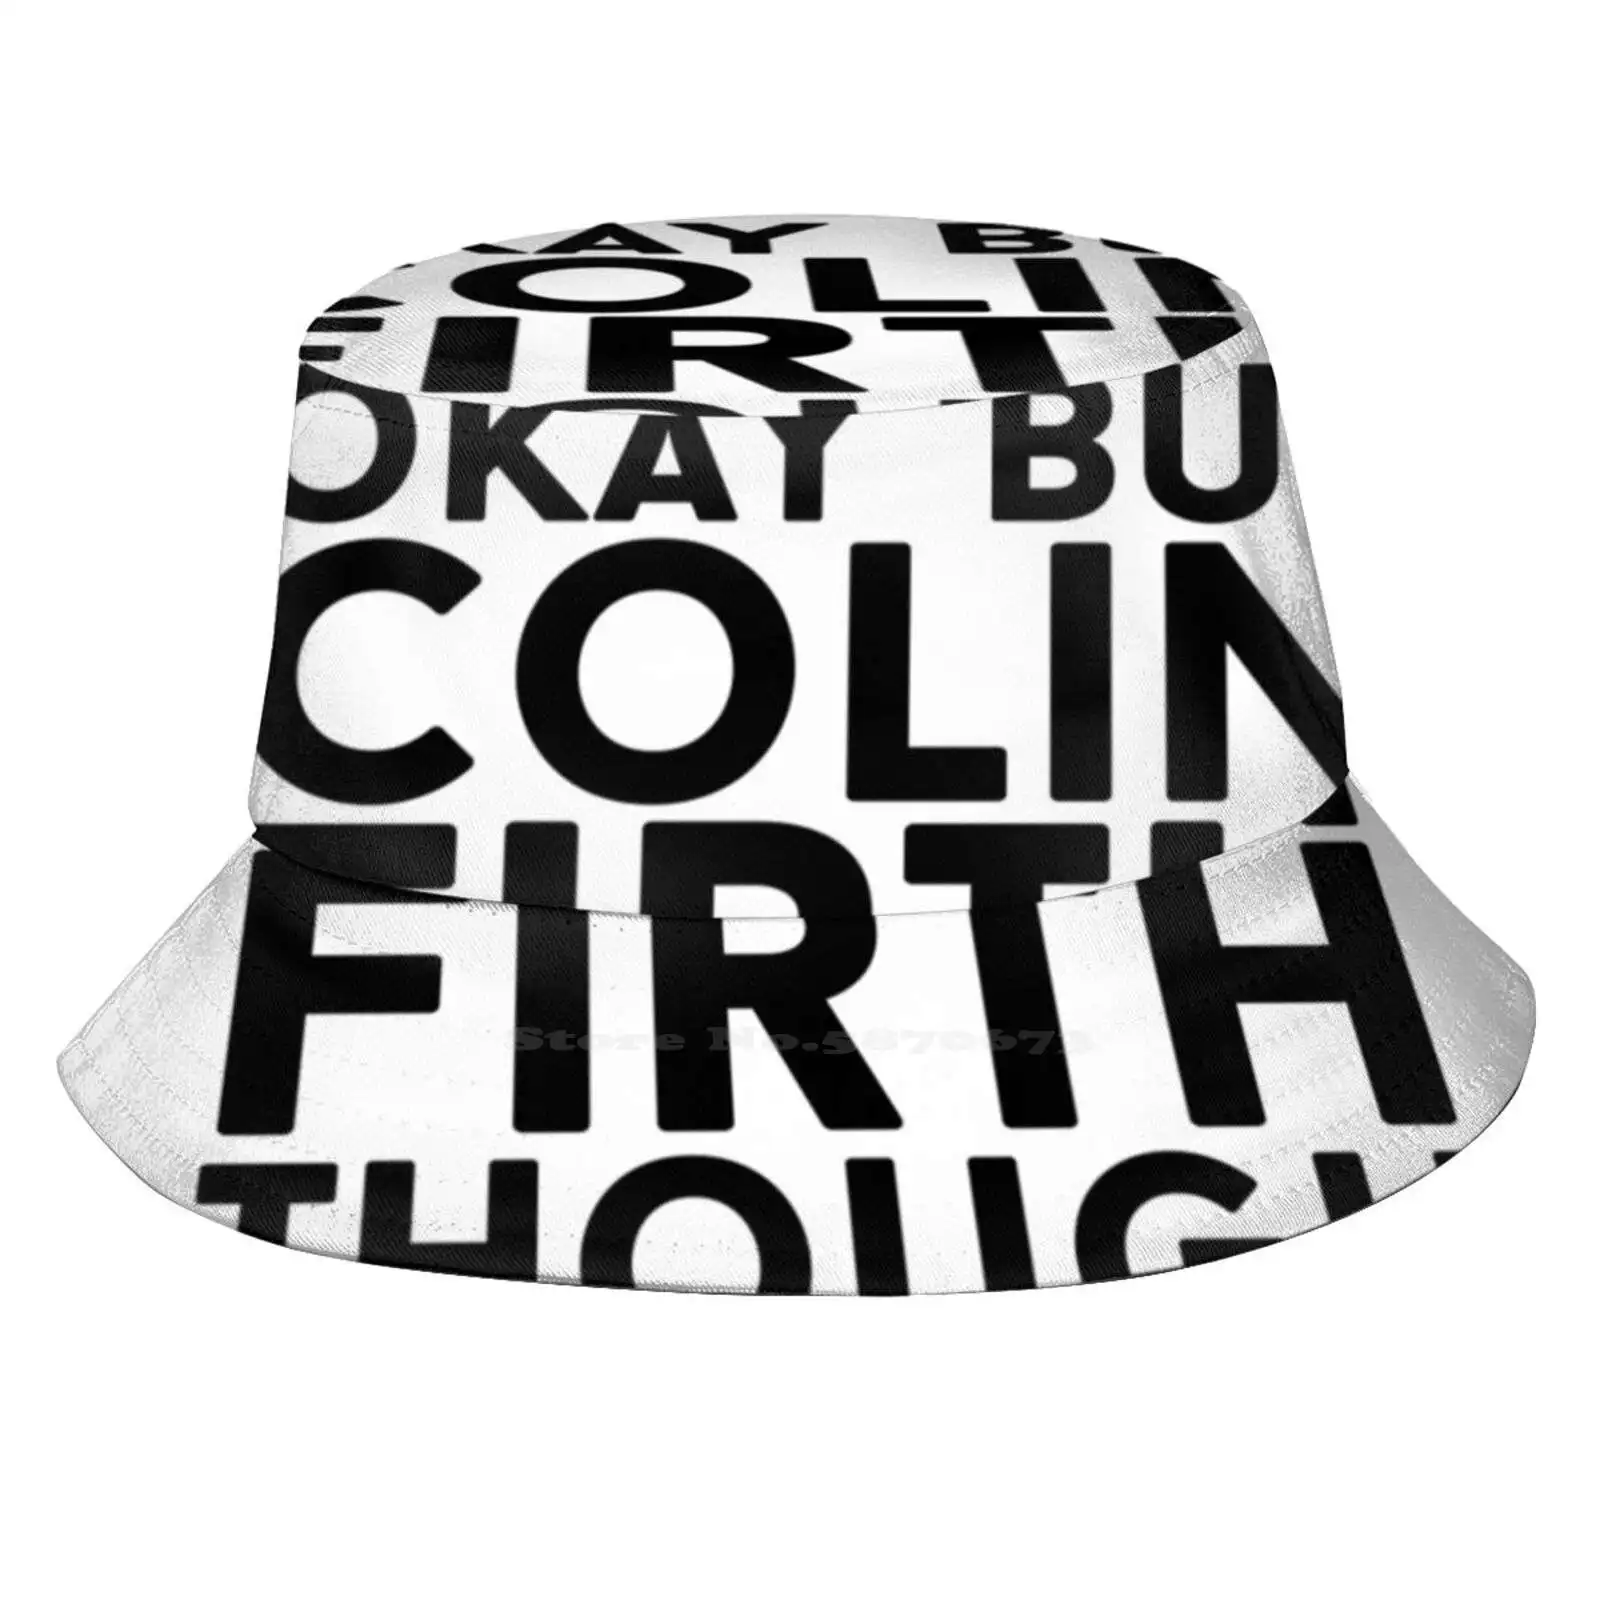 

Colin Firth Unisex Summer Outdoor Sunscreen Hat Cap Colin Firth Kingsman Harry Hart Pride And Prejudice Mr Darcy The Kings